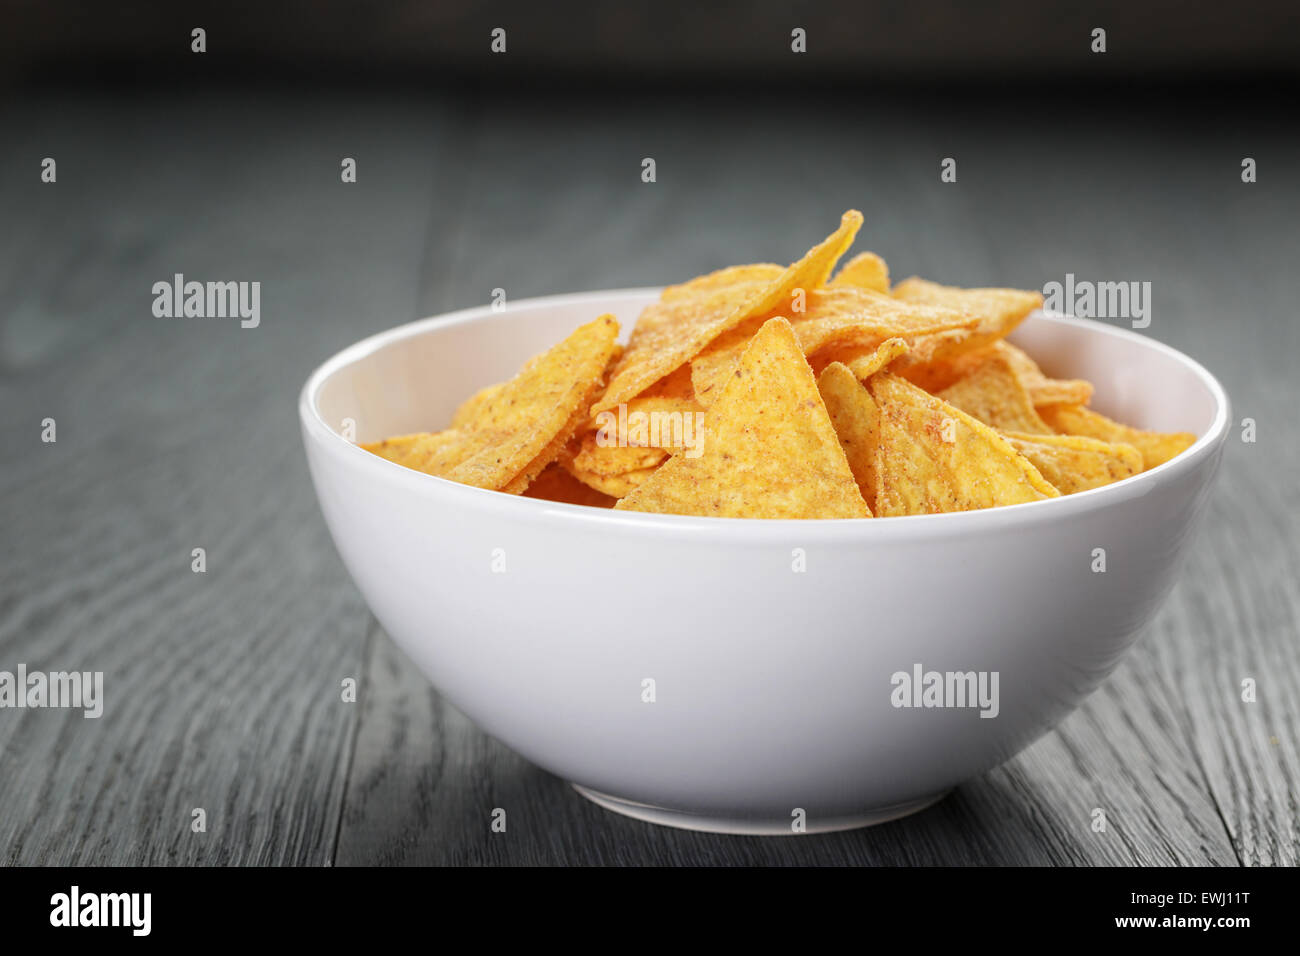 tortilla chips in white bowl on wooden table Stock Photo